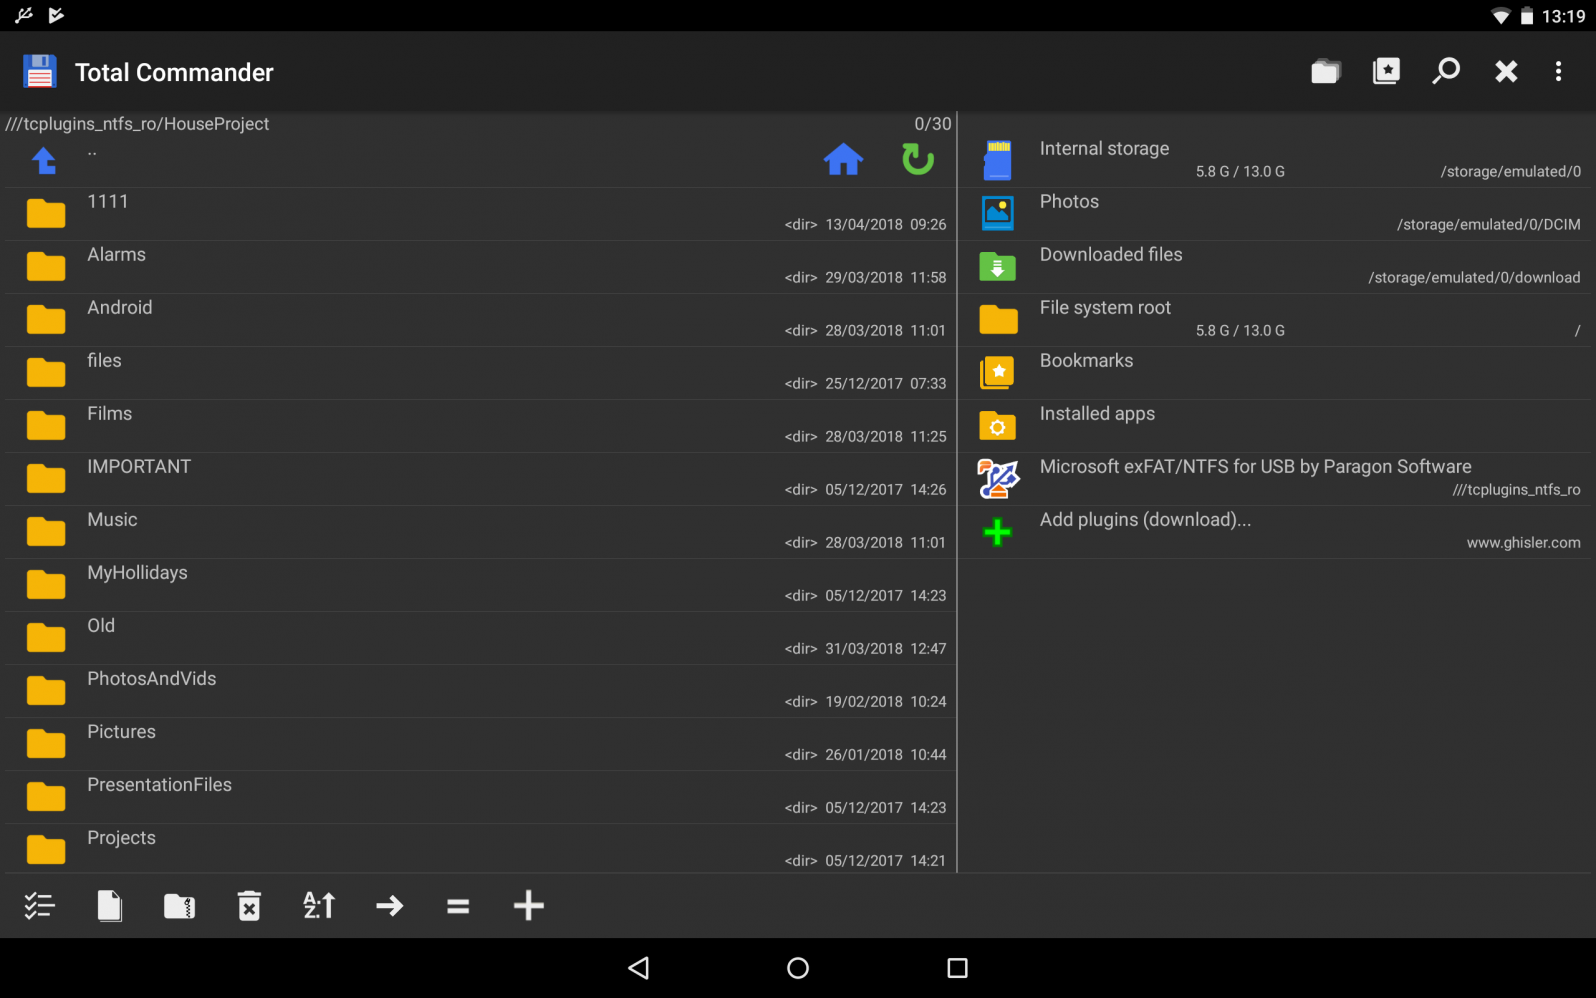 Microsoft exFAT/NTFS for USB On-The-Go by Paragon Software. Connect external storage to Android device. Screenshot.